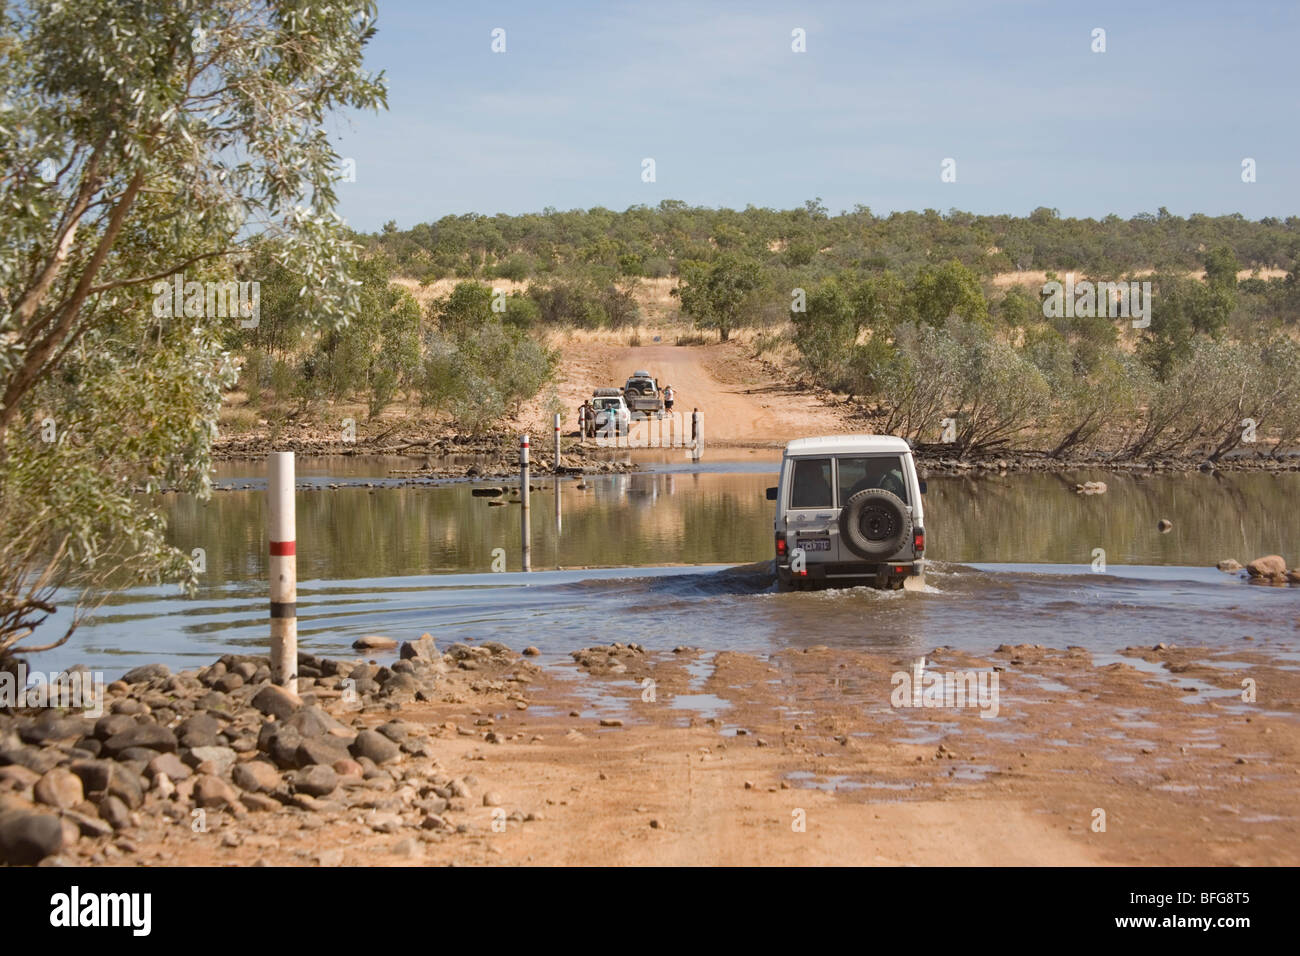 The Pentecost crossing on the Gibb River Road – former drovers track through the Kimberley in Western Australia Stock Photo